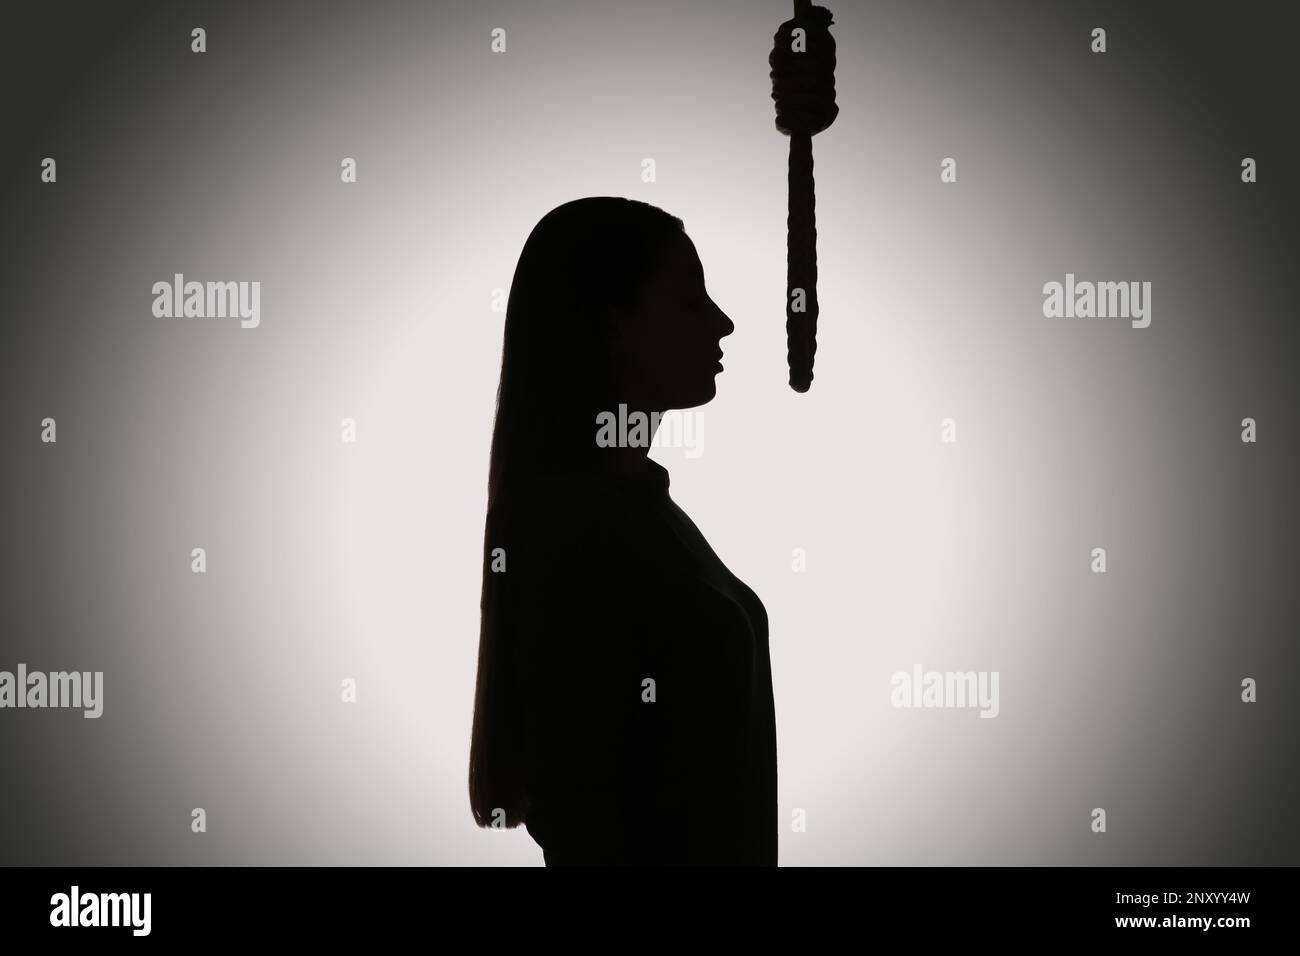 Silhouette of woman with rope noose on light background Stock Photo